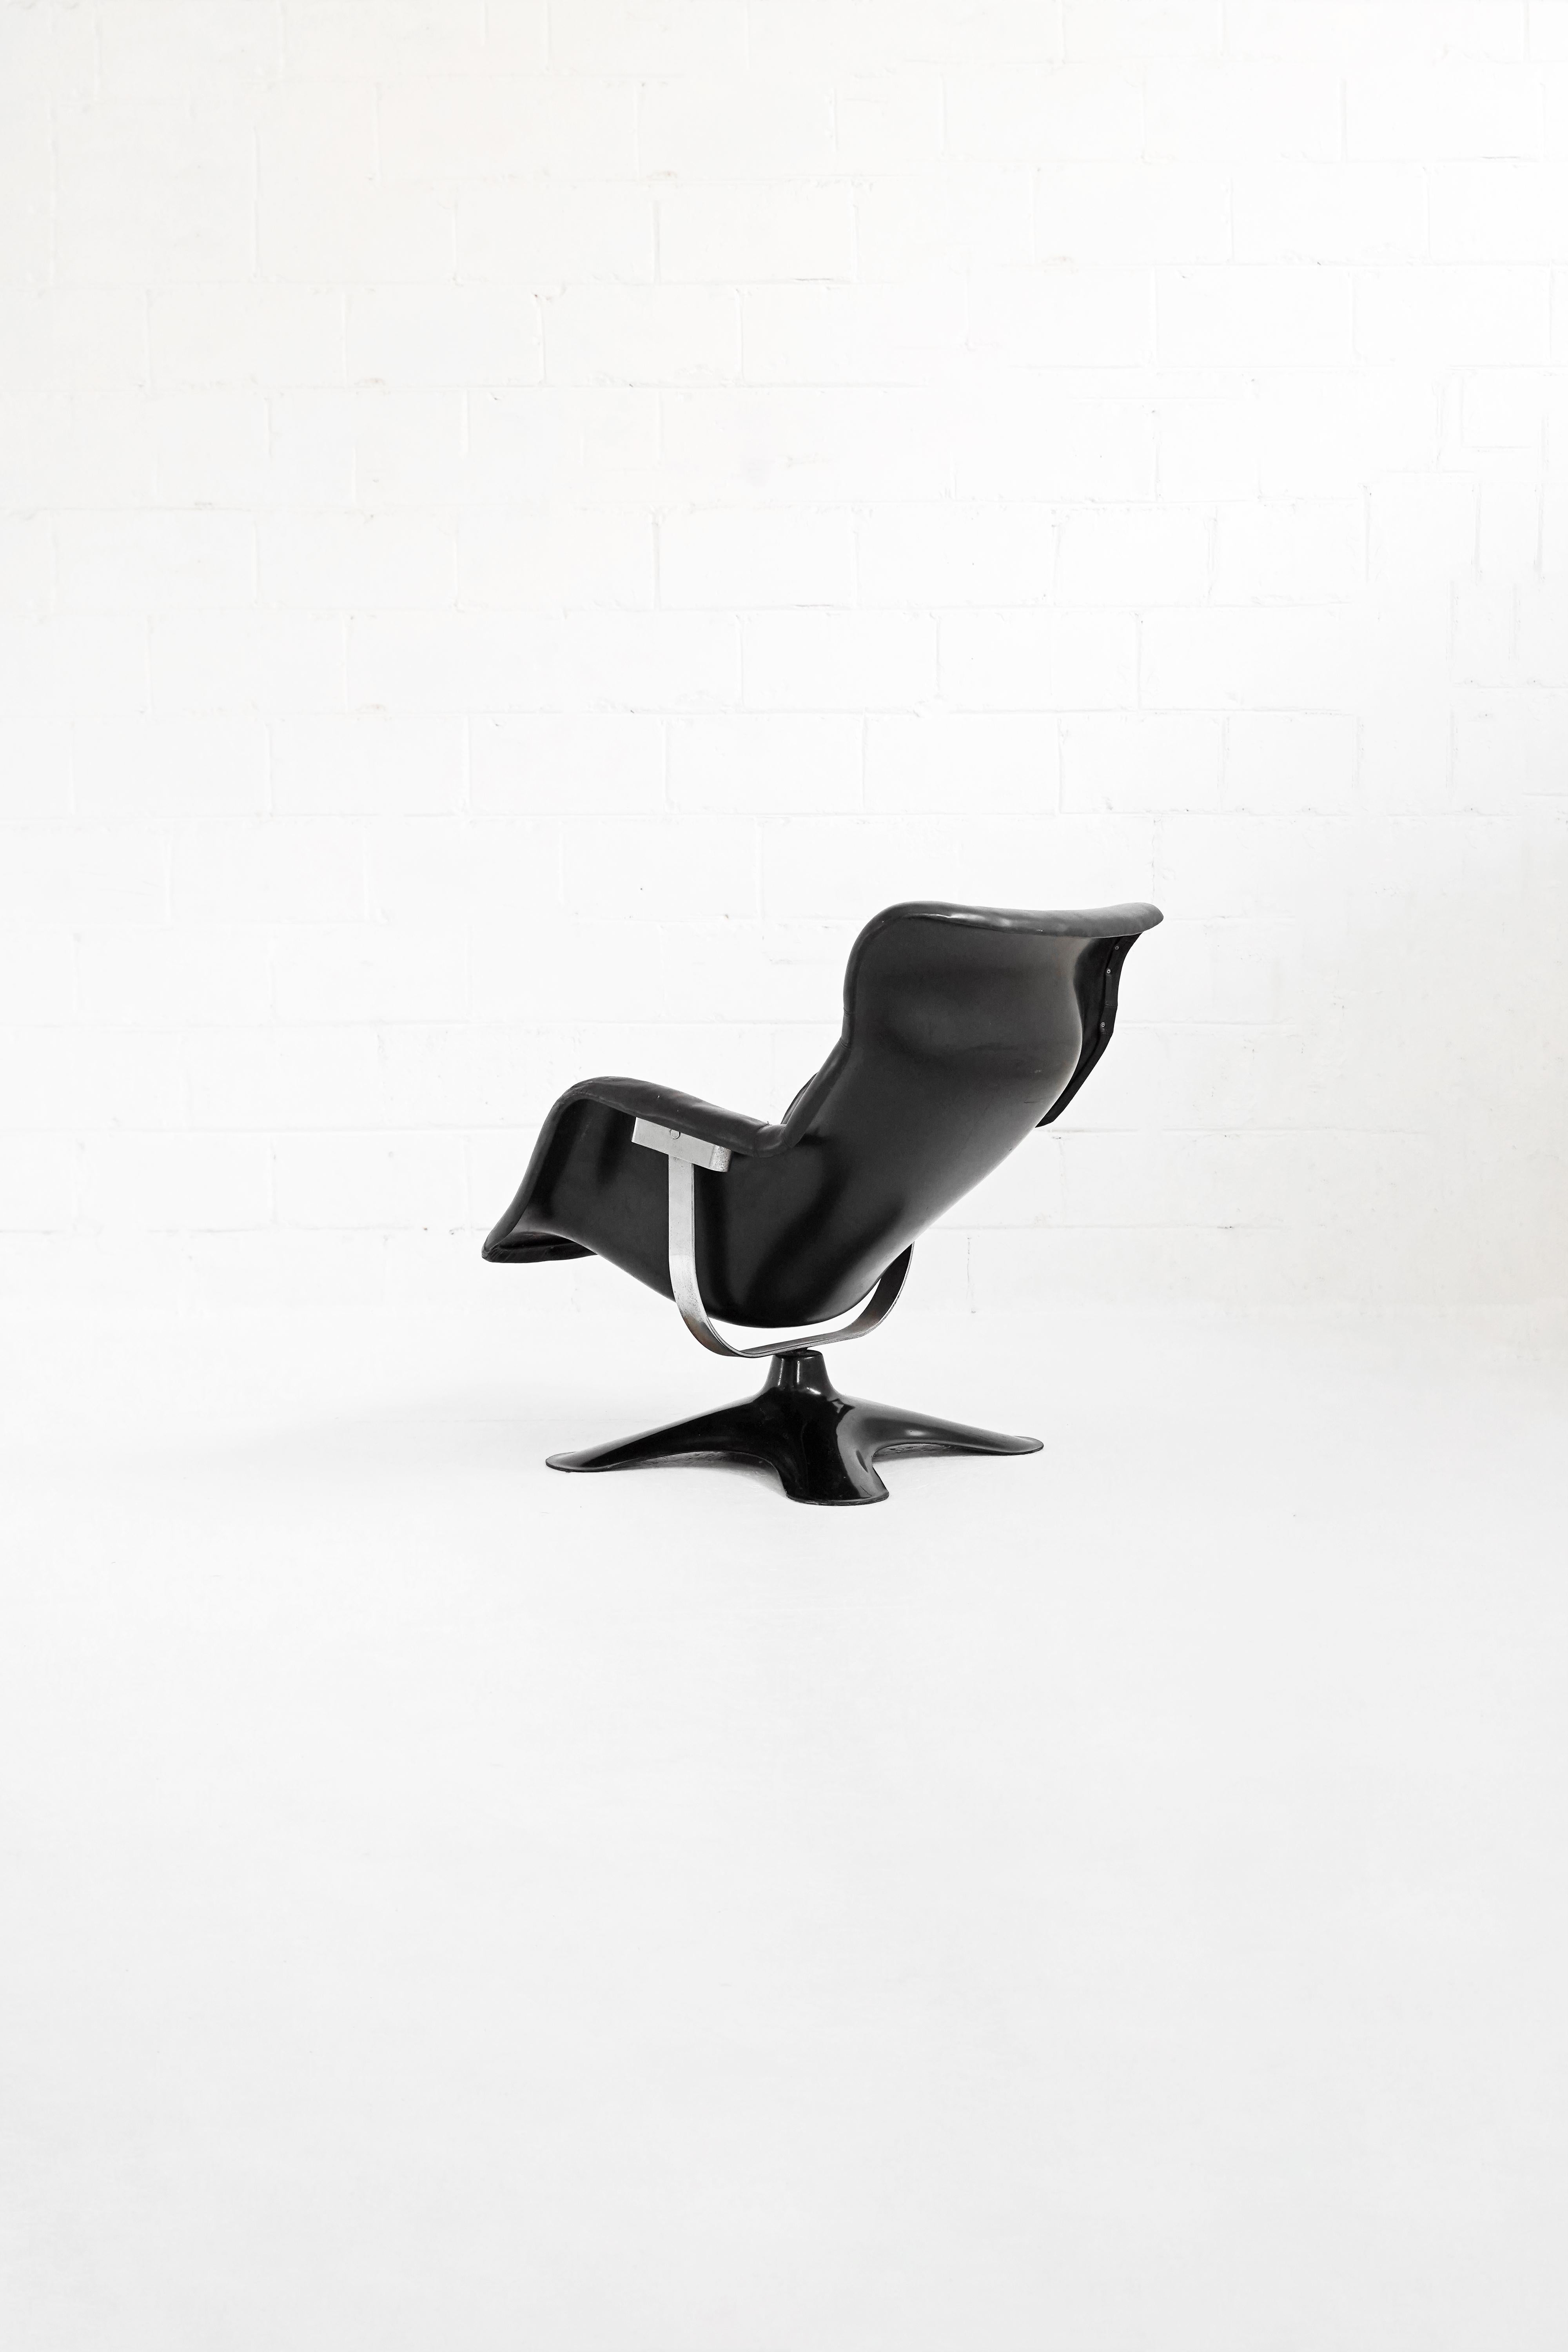 Very unique and comfortable lounge chair by Yrjo Kukkapuro for Haimi. 1960s-1970s production. A tilting molded plastic shell atop a chromed steel suspension frame and swivel base. Covered in original black leather showing signs of wear, does not